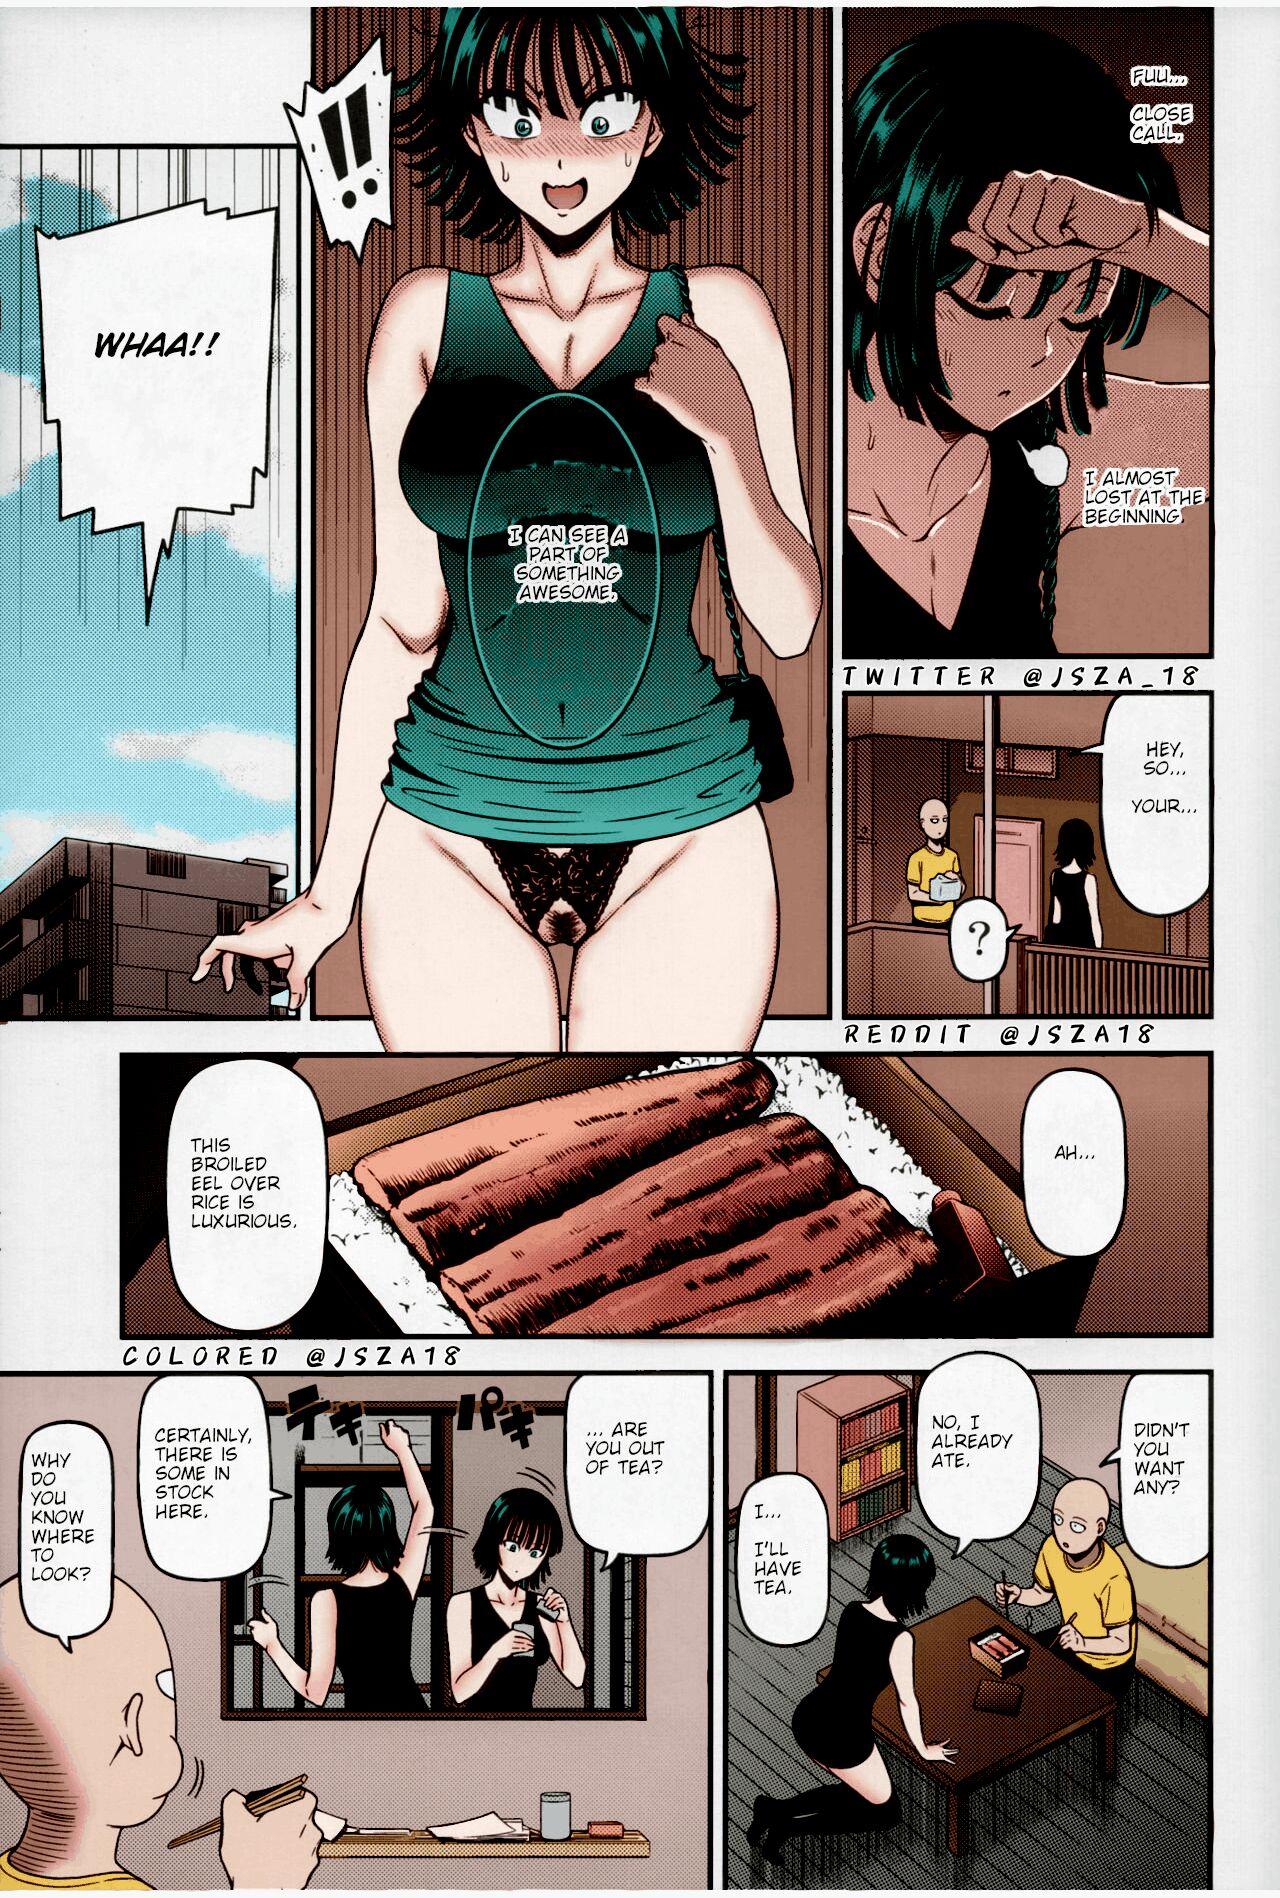 Gorgeous ONE-HURRICANE 6 - One punch man Sensual - Page 4